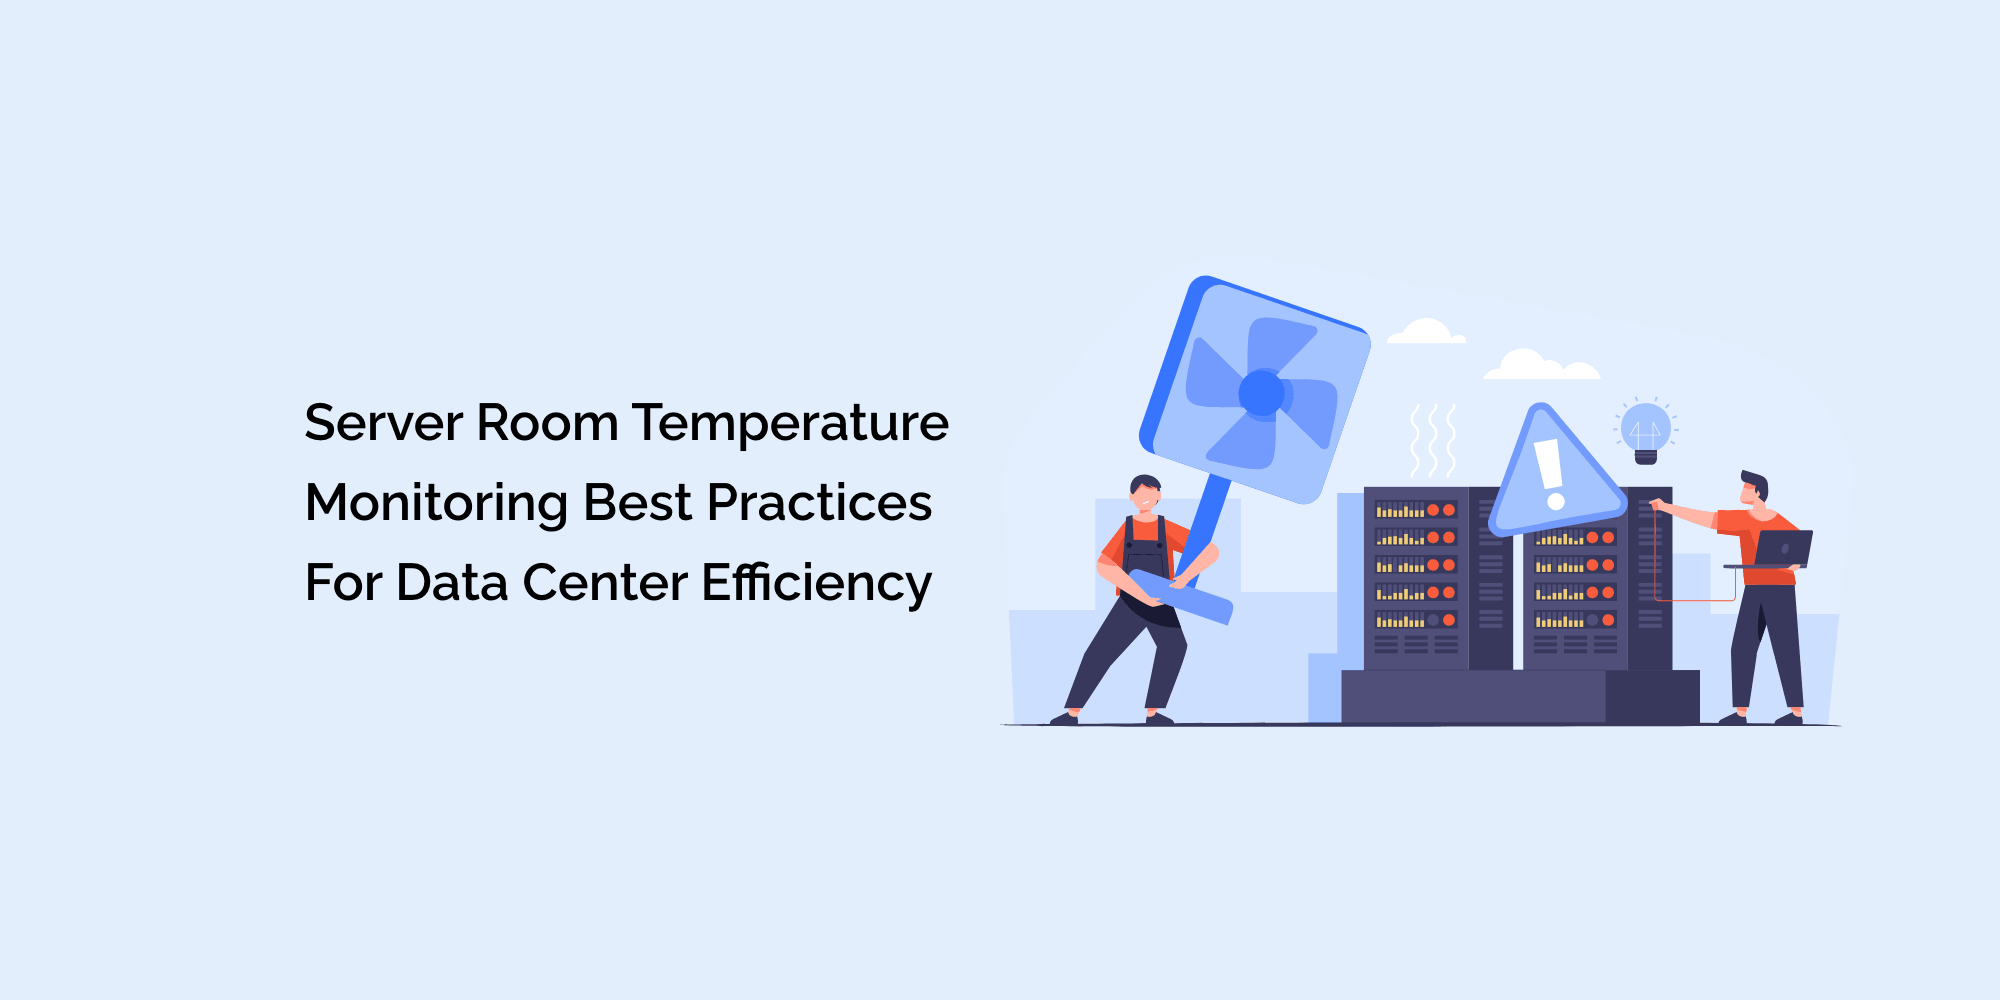 Server Room Temperature Monitoring Best Practices for Data Center Efficiency